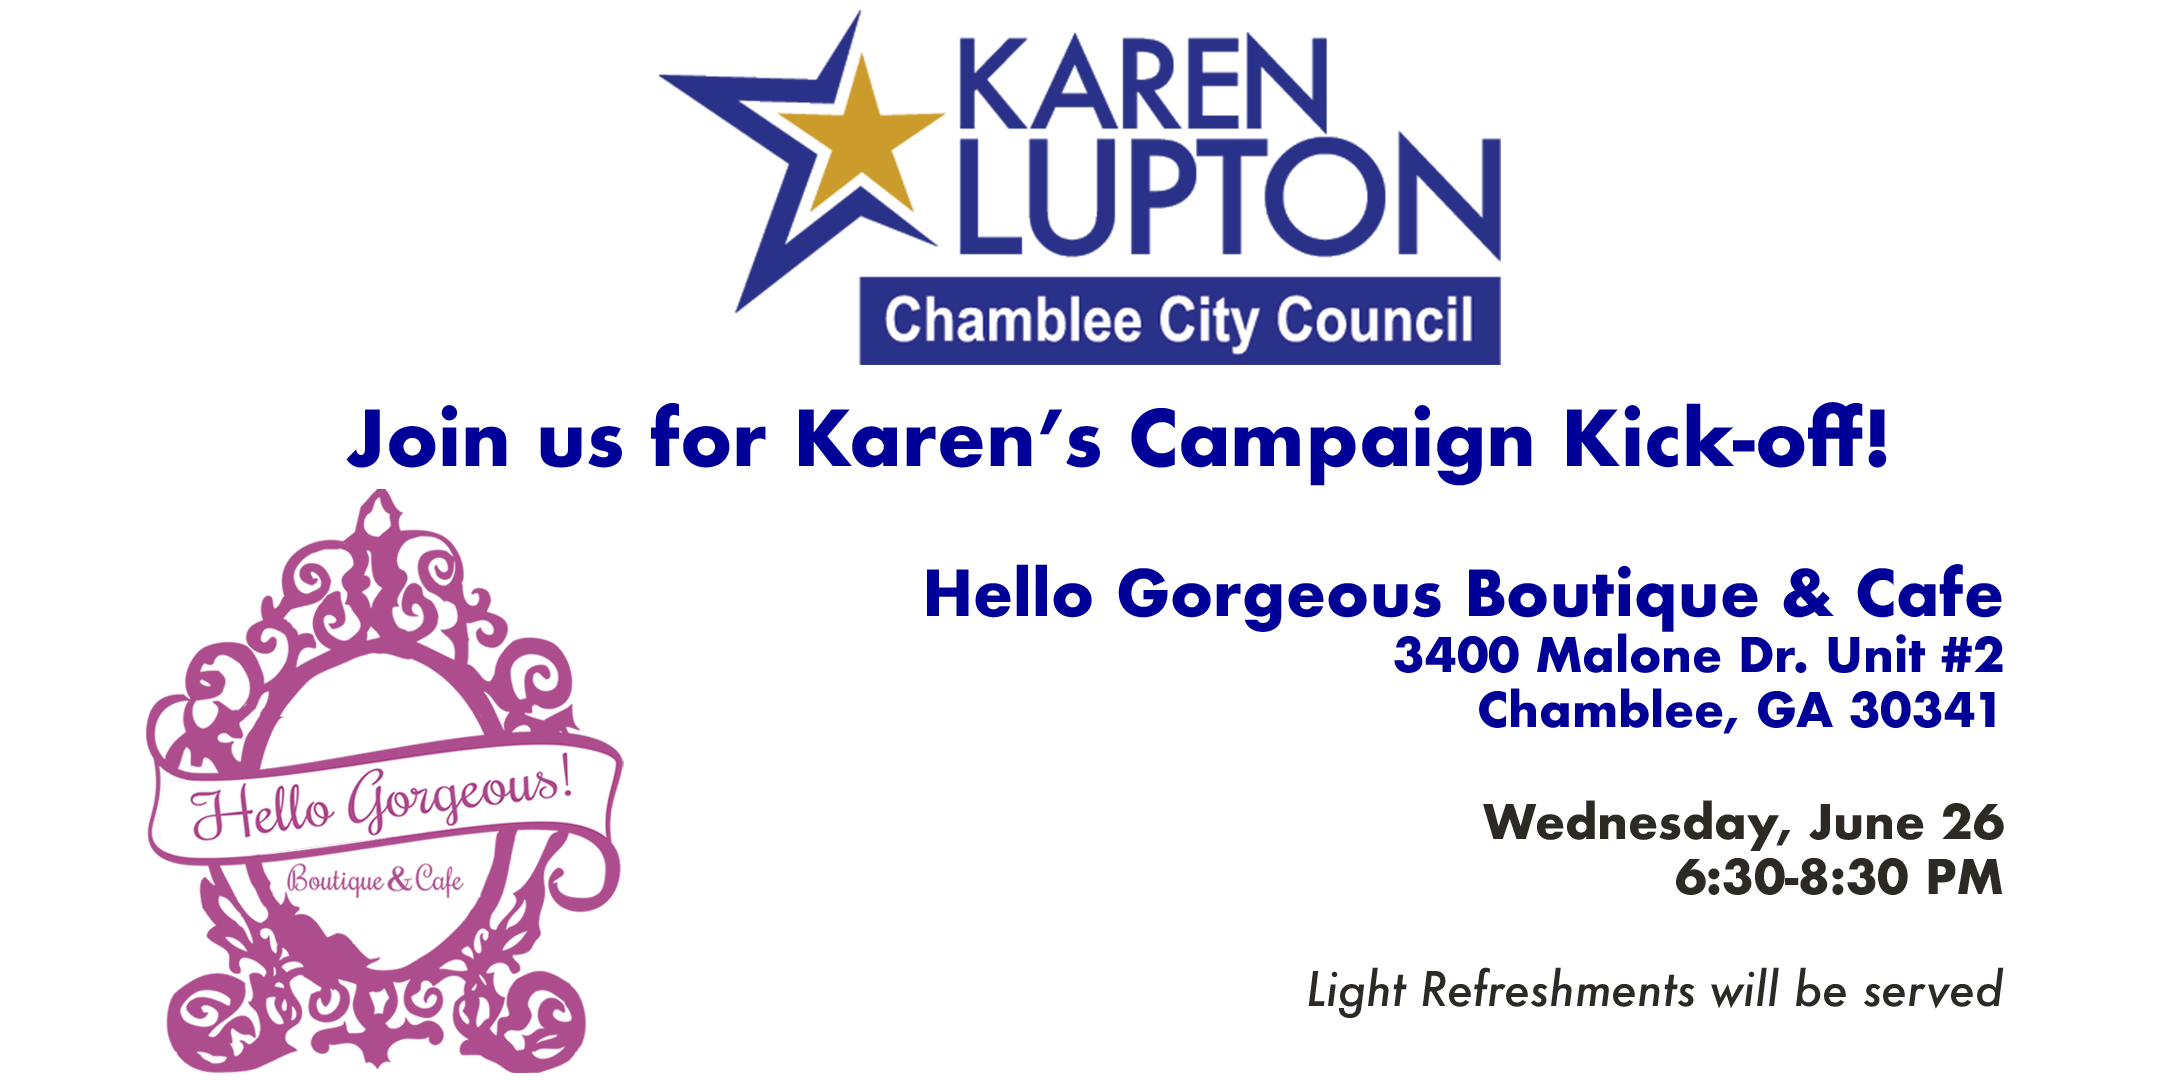 Karen Lupton for Chamblee City Council Campaign Kick-off & Fundraiser